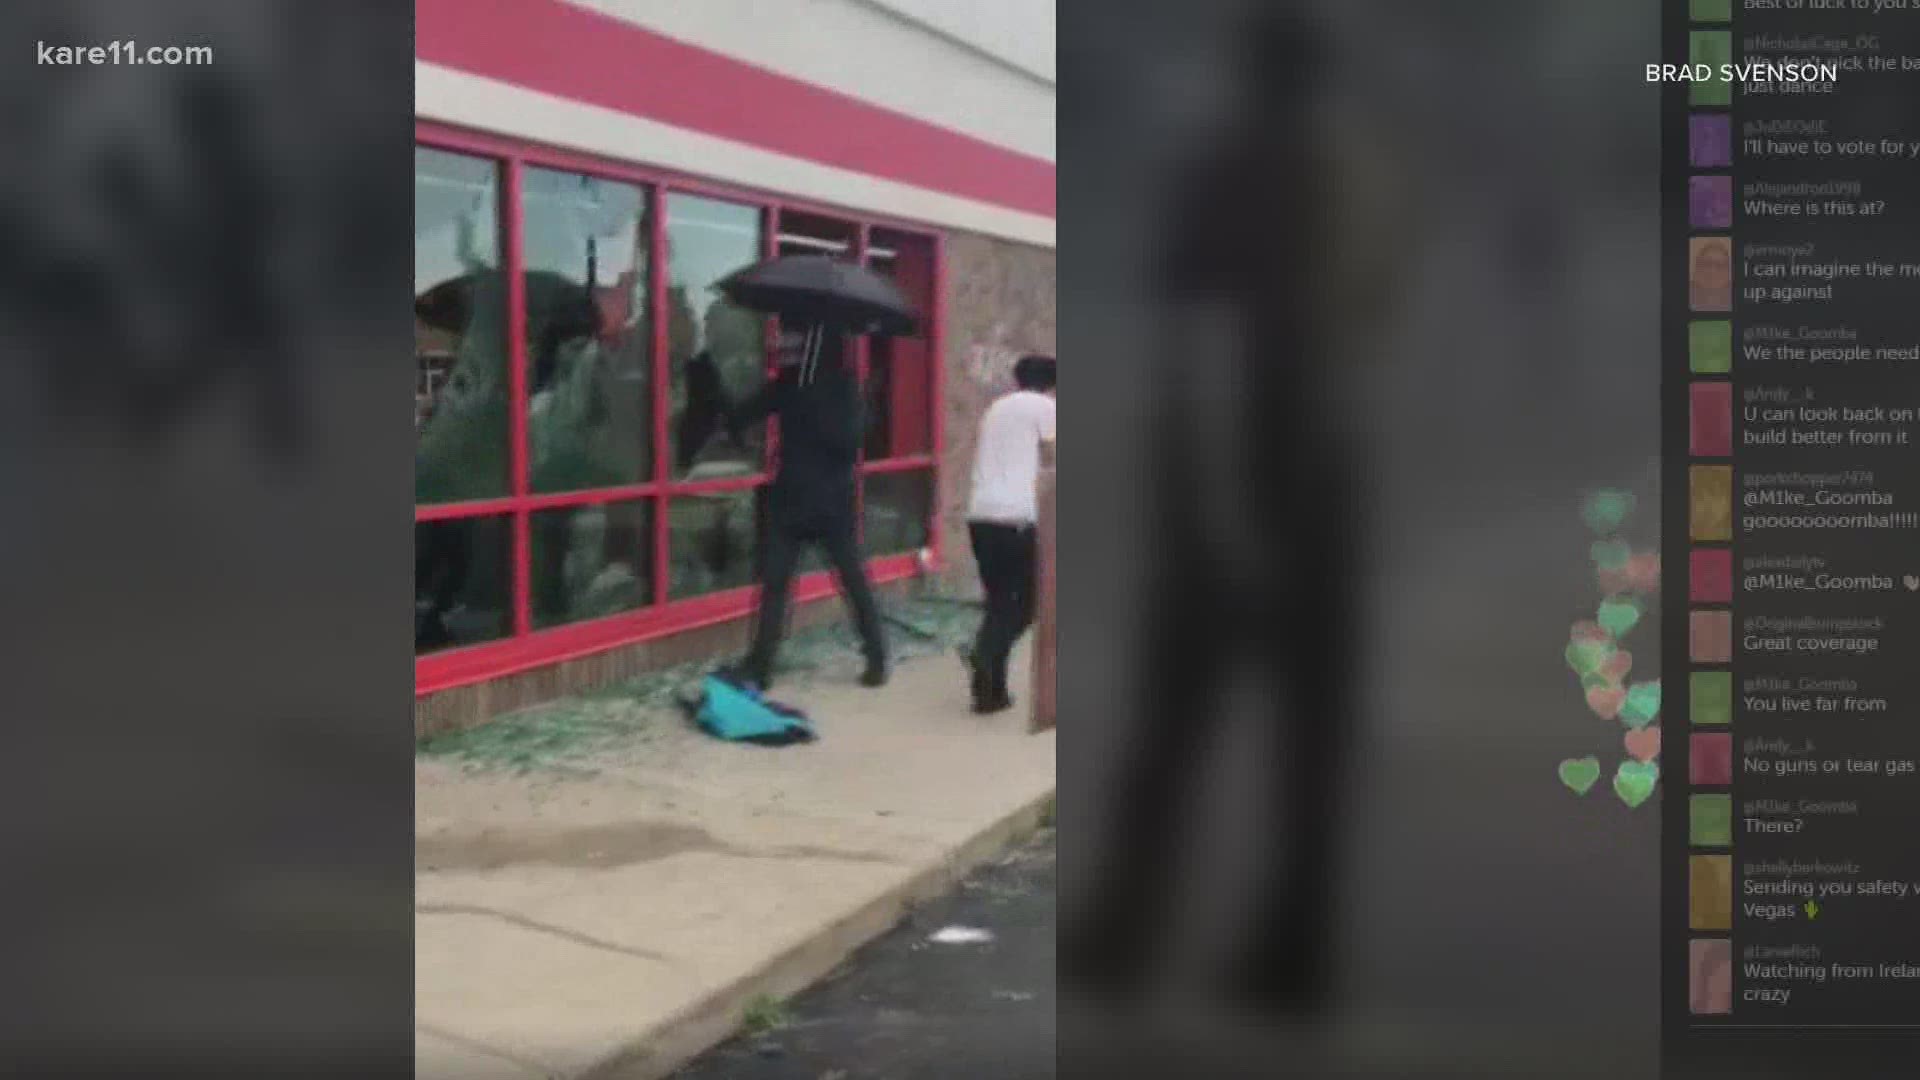 On the evening of May 27, 2020, a man dressed in all black, carrying an umbrella and a sledgehammer is seen on video walking to an Auto Zone and smashing the windows